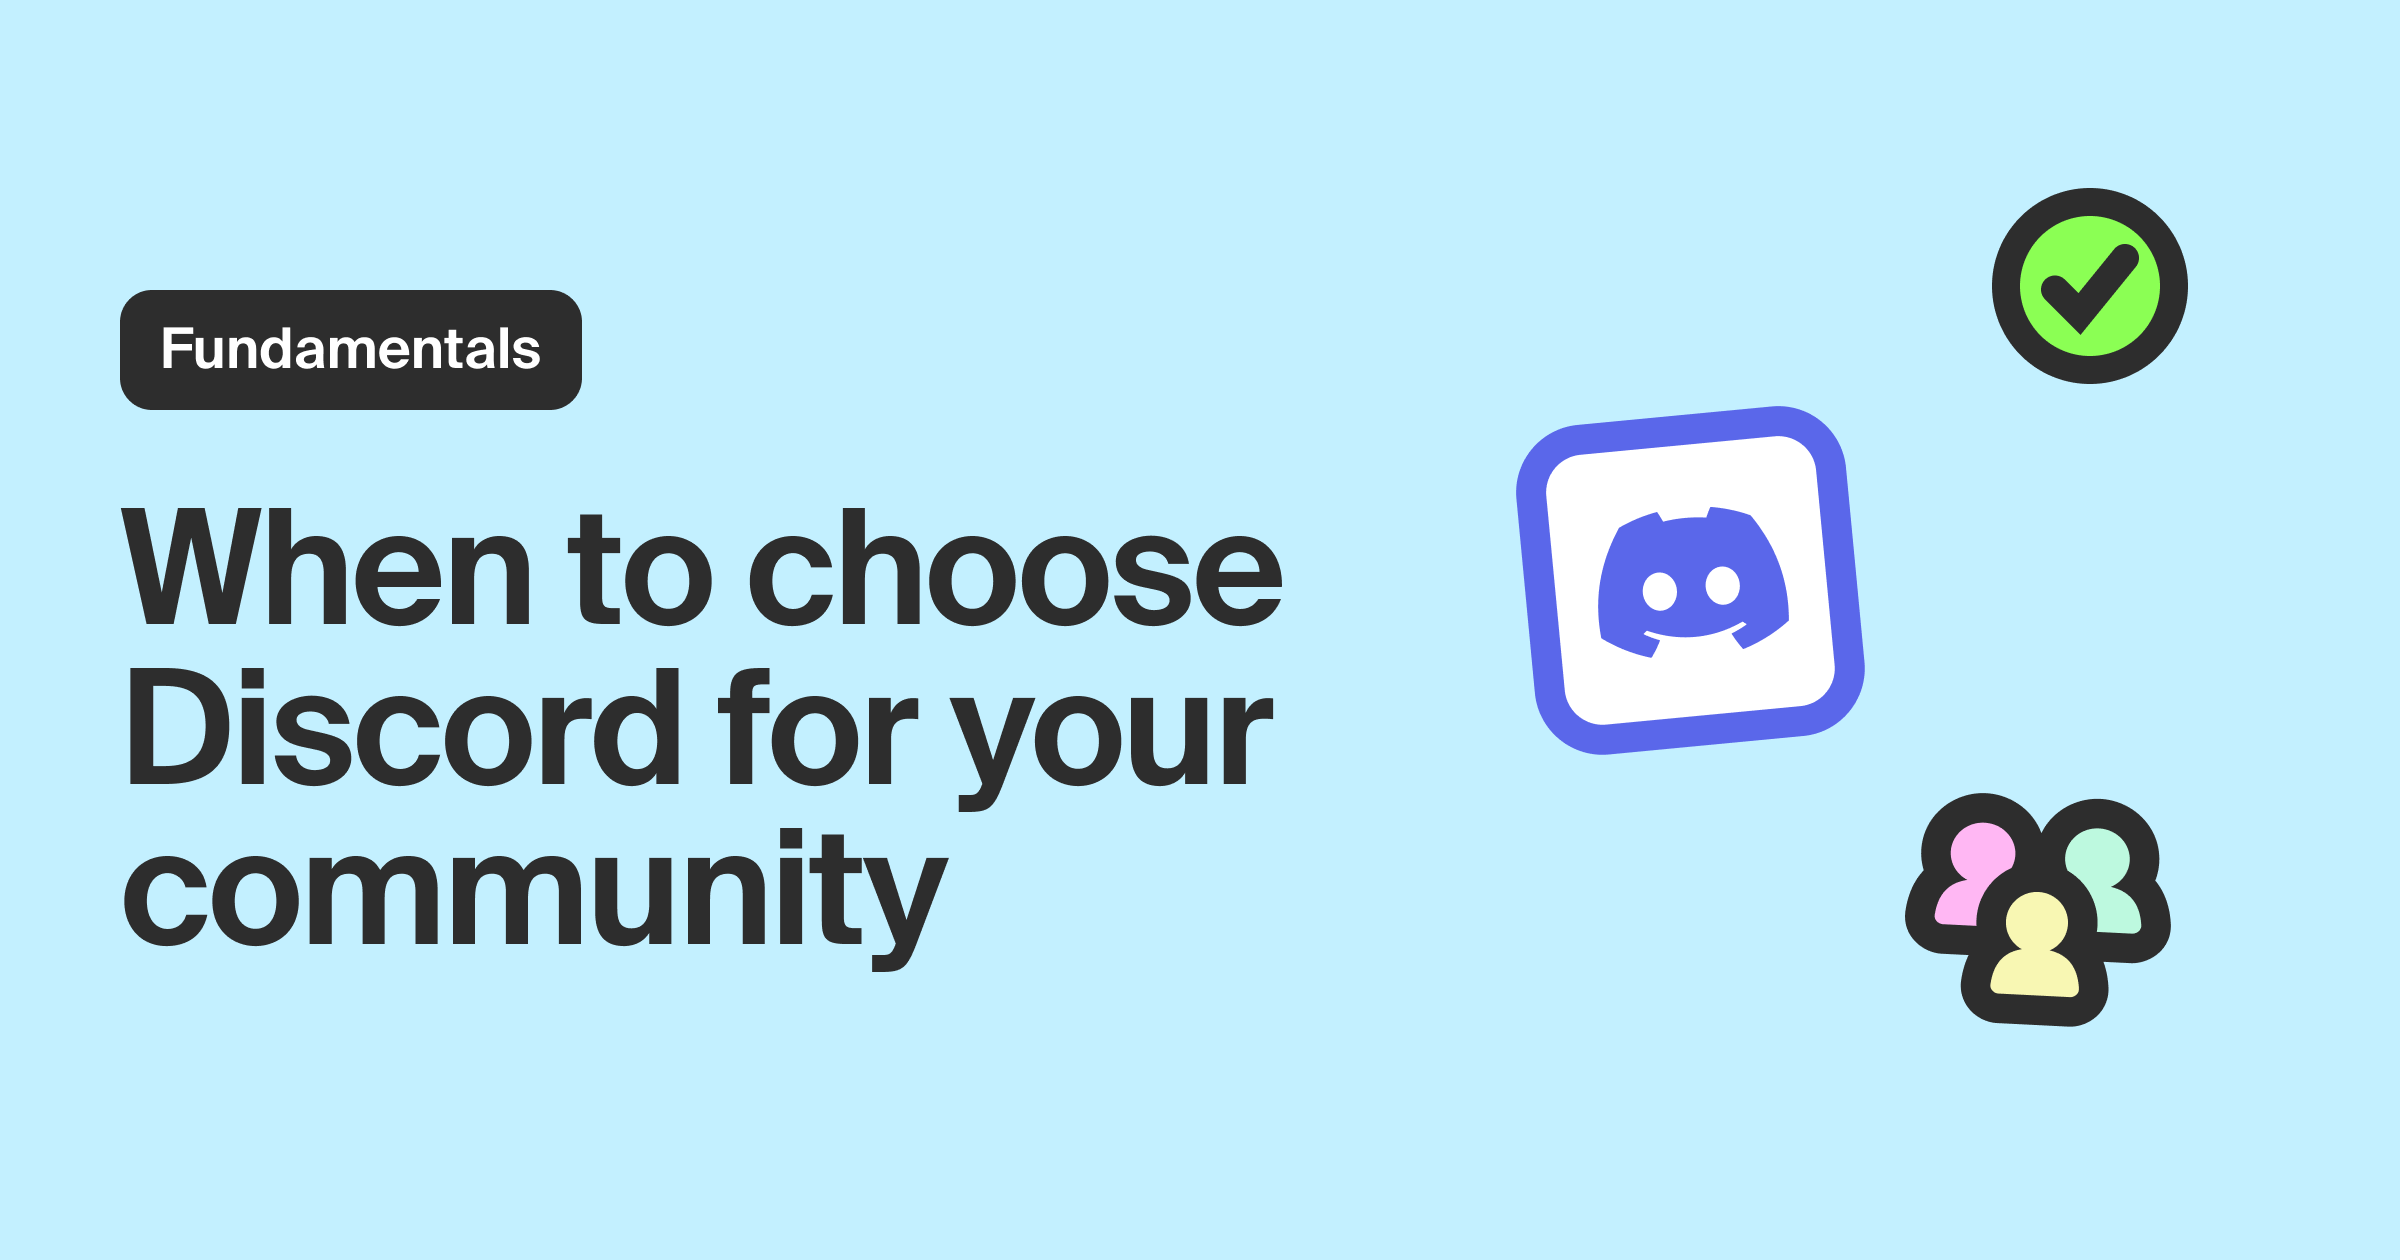 When to choose Discord for your community